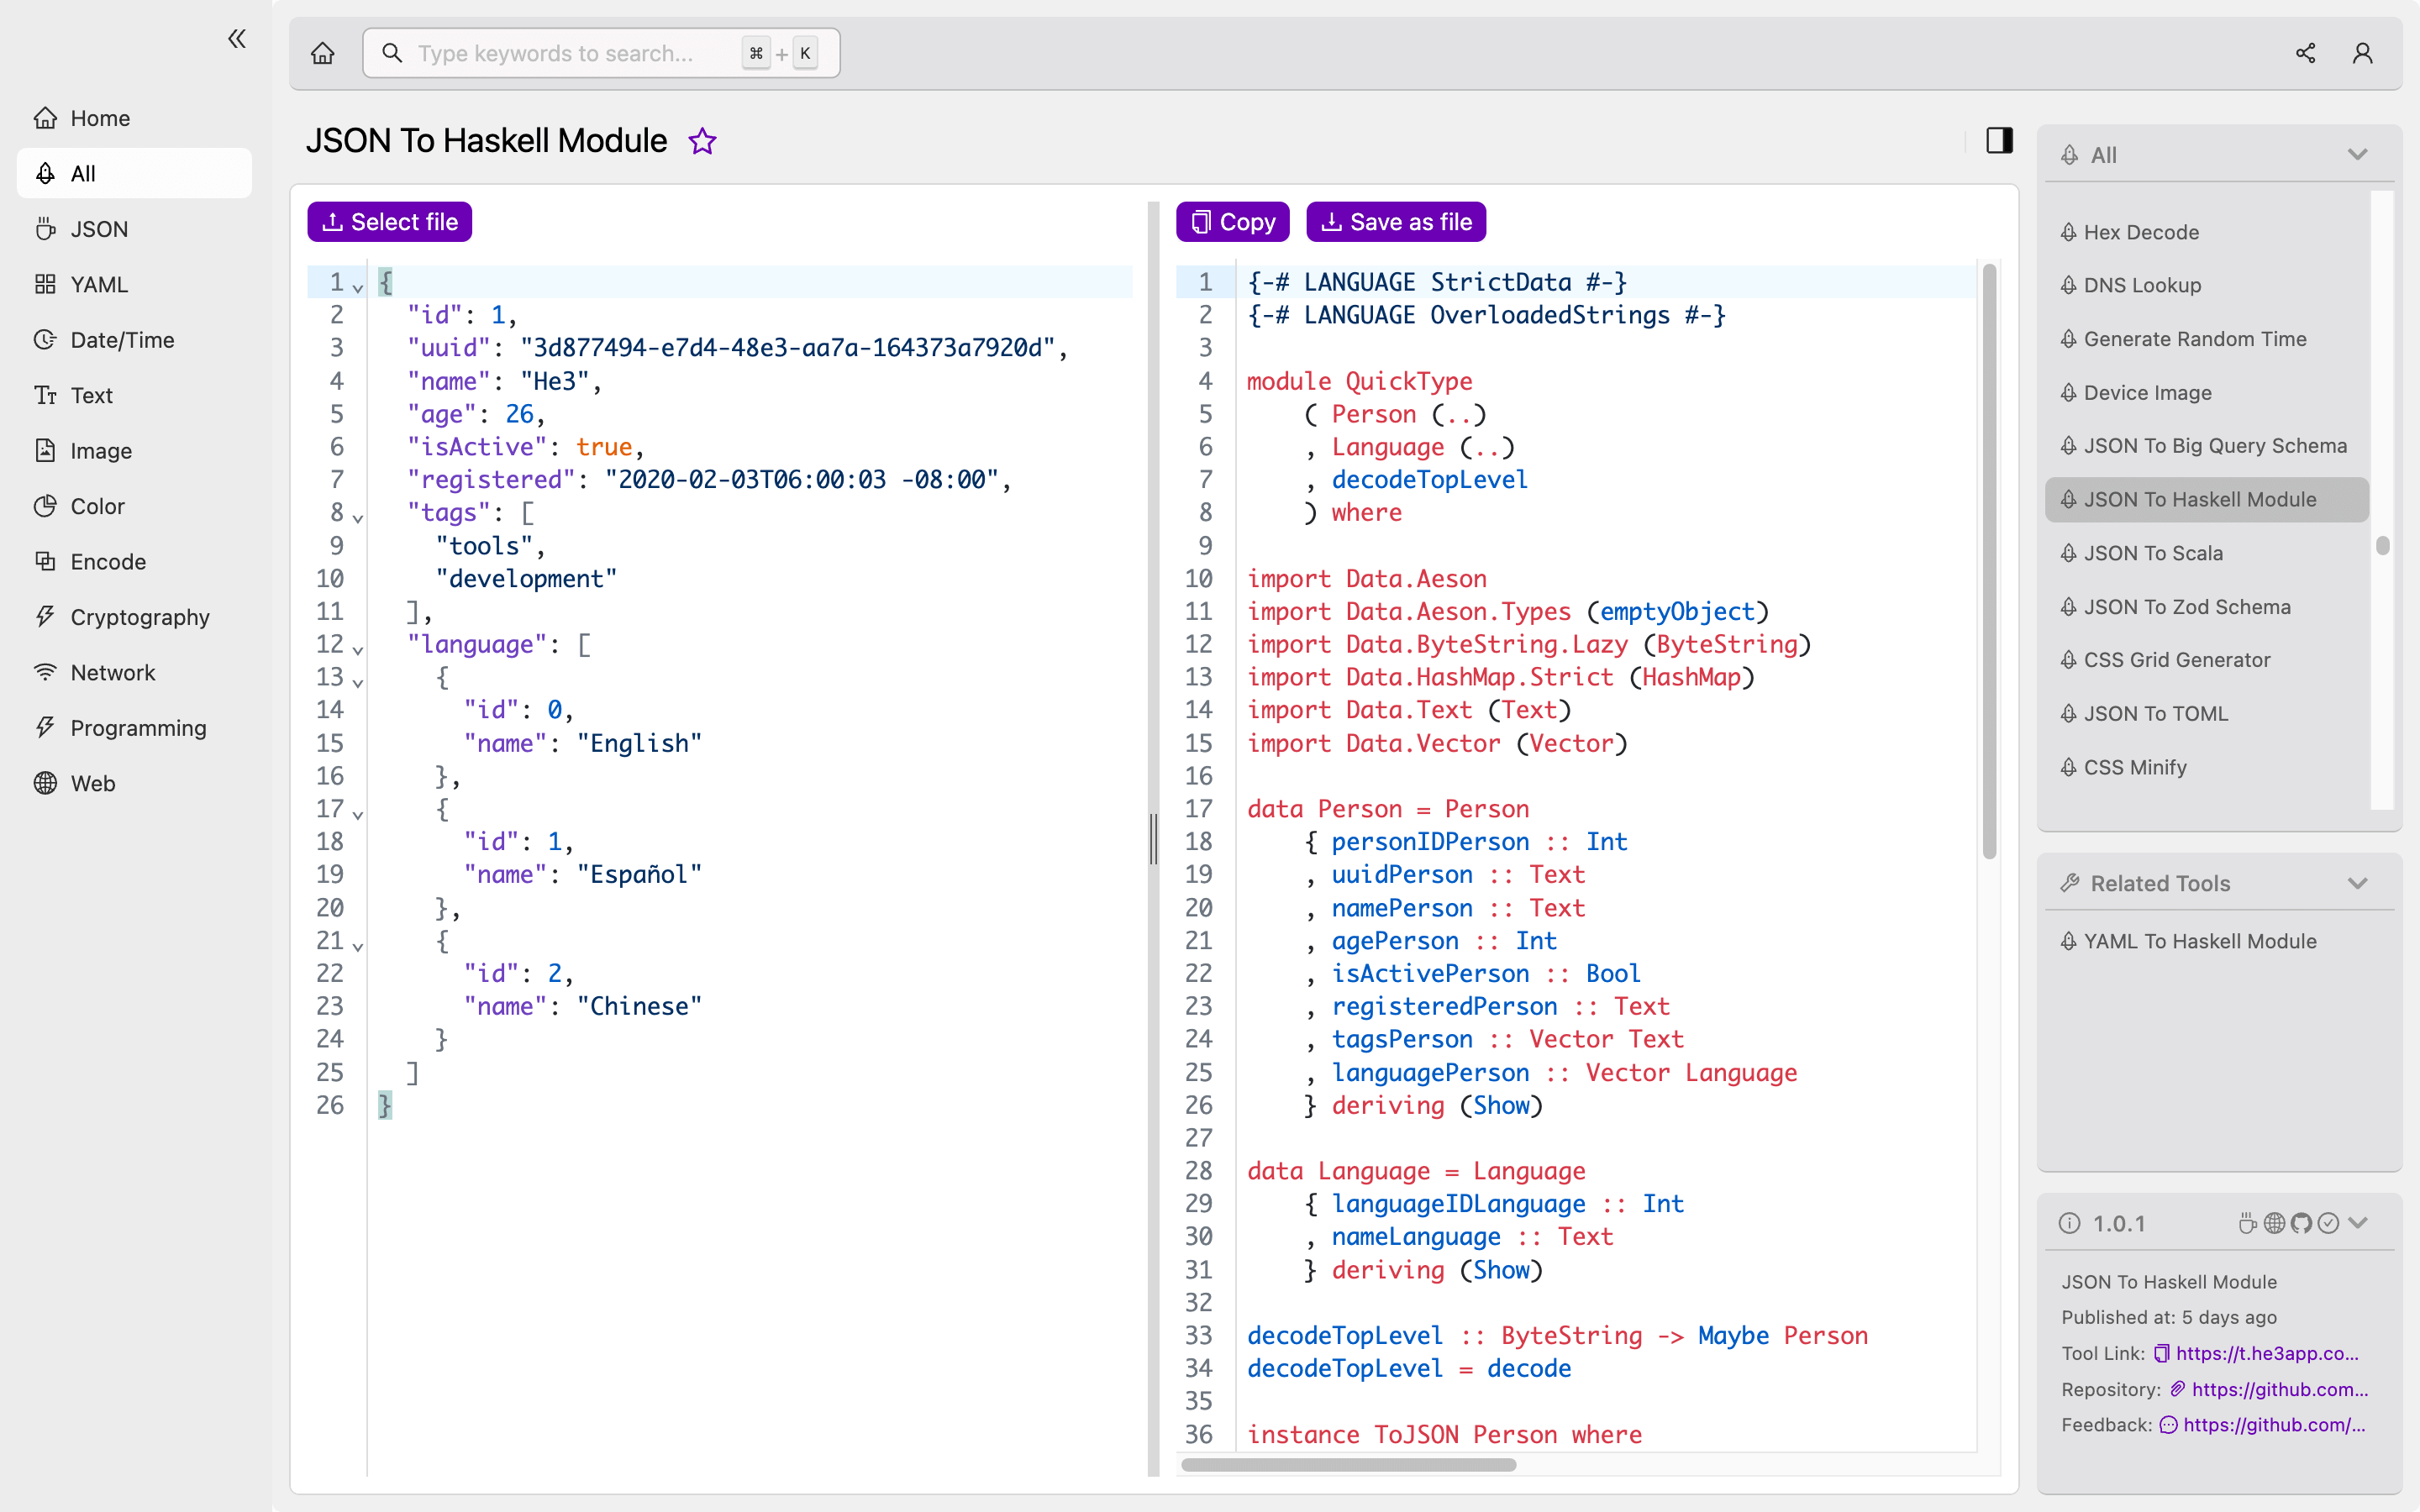 JSON To Haskell Module